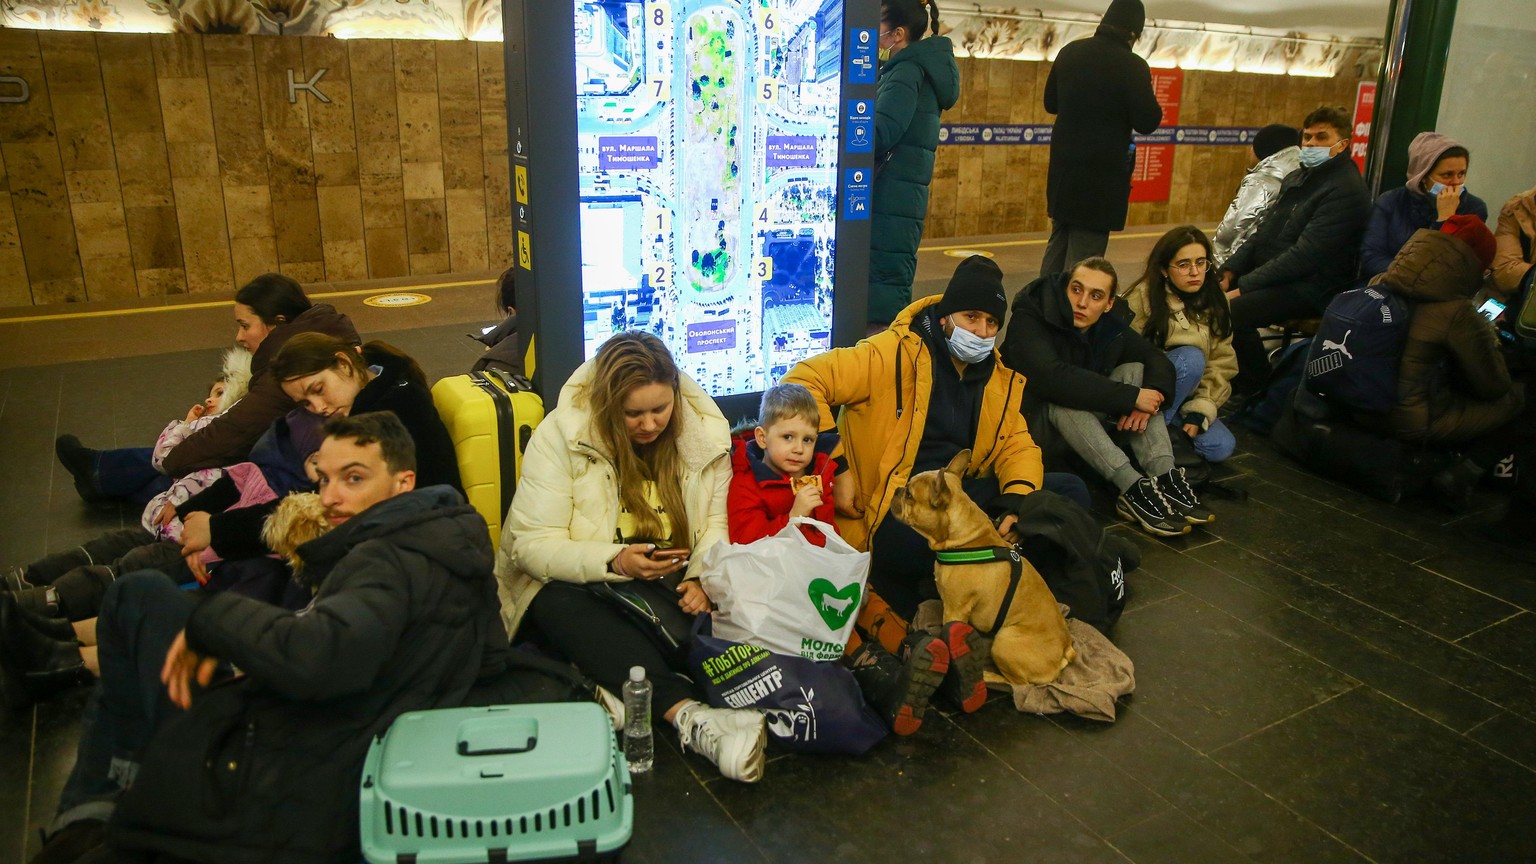 KYIV, UKRAINE - FEBRUARY 24: People take shelter in a metro station in Kyiv, Ukraine on February 24, 2022. Air raid sirens rang out in downtown Kyiv today as cities across Ukraine were hit with what U ...